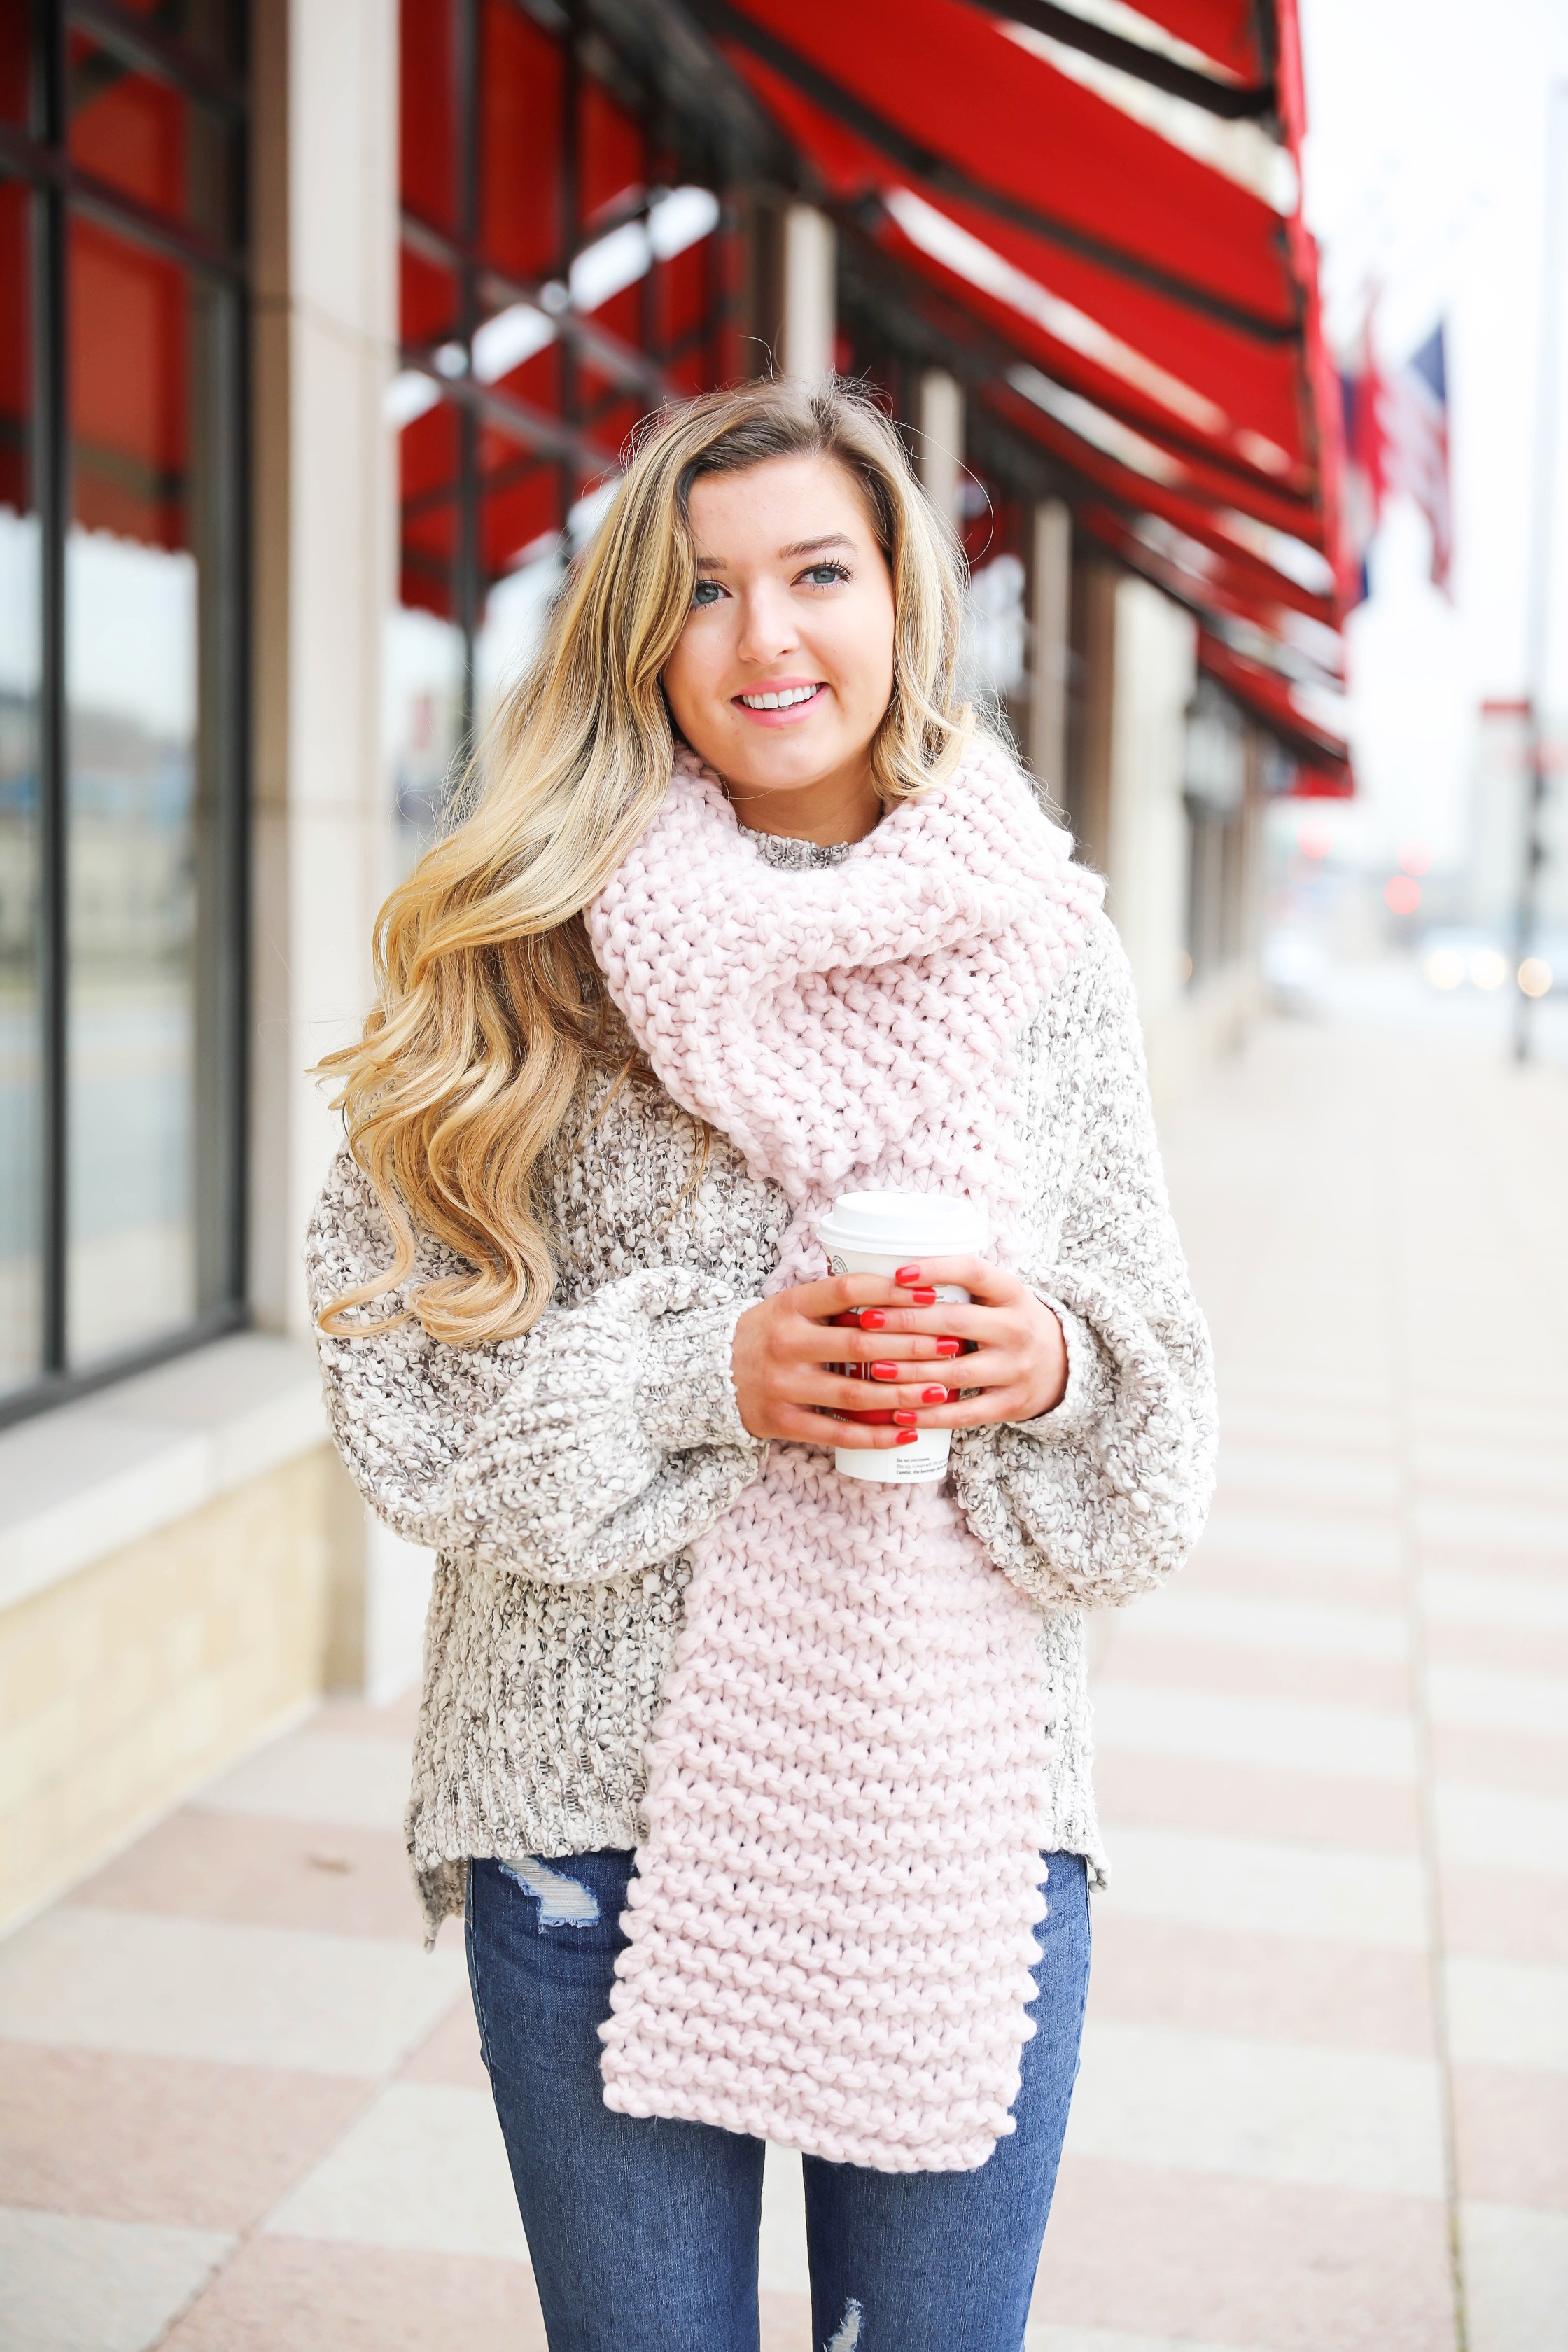 Huge knit scarf and cozy knit sweater with frye riding boots! Such a super cute winter outfit idea! Red cup from Starbucks with a cute winter outfit! Details on fashion blog daily dose of charm lauren lindmark